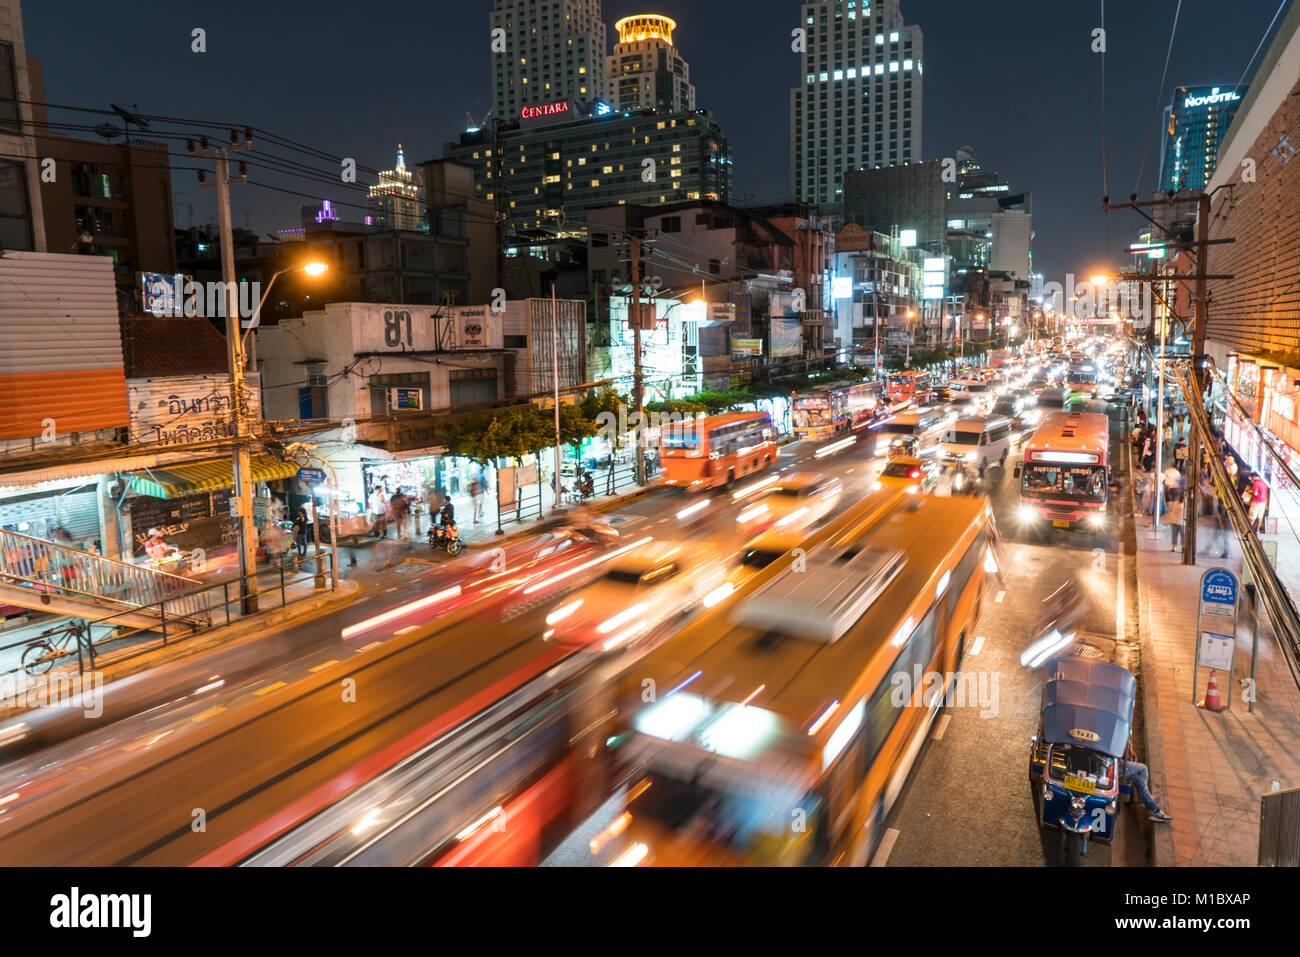 A view of the traffic on the streets of Bangkok, Thailand Stock Photo